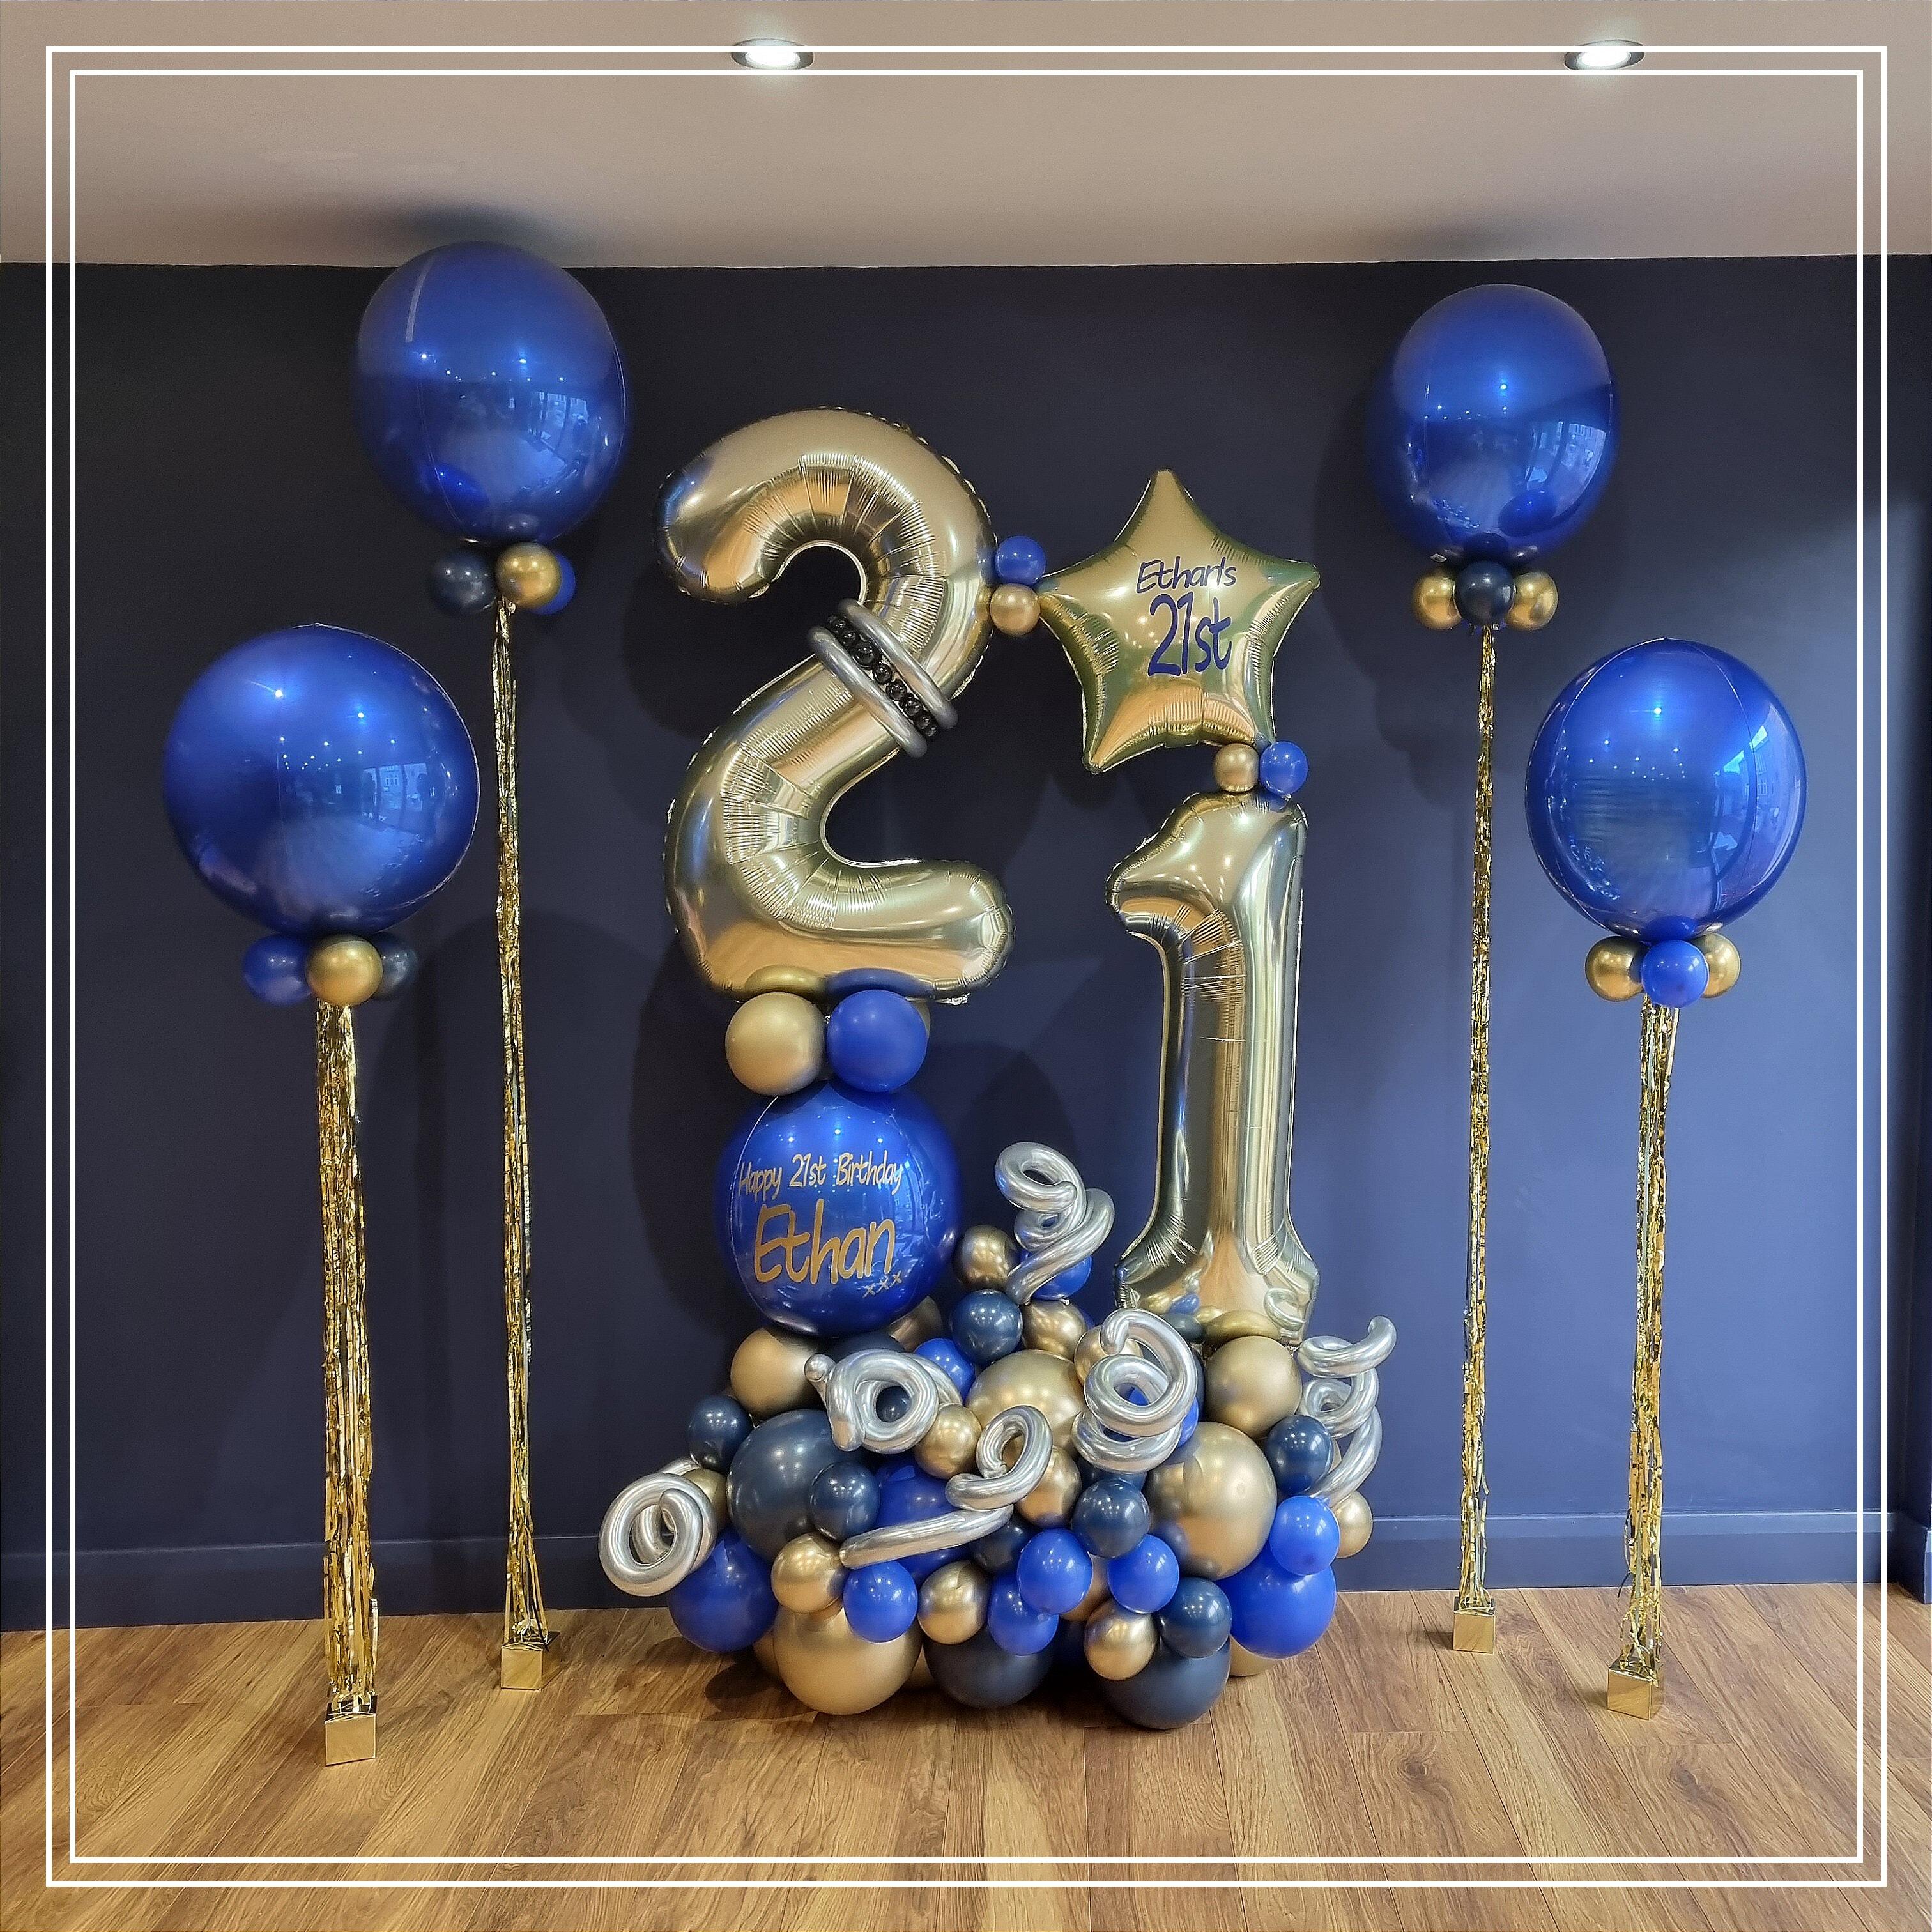 Huge Double Number Balloon Display in a blue room ideal for birthday celebrations